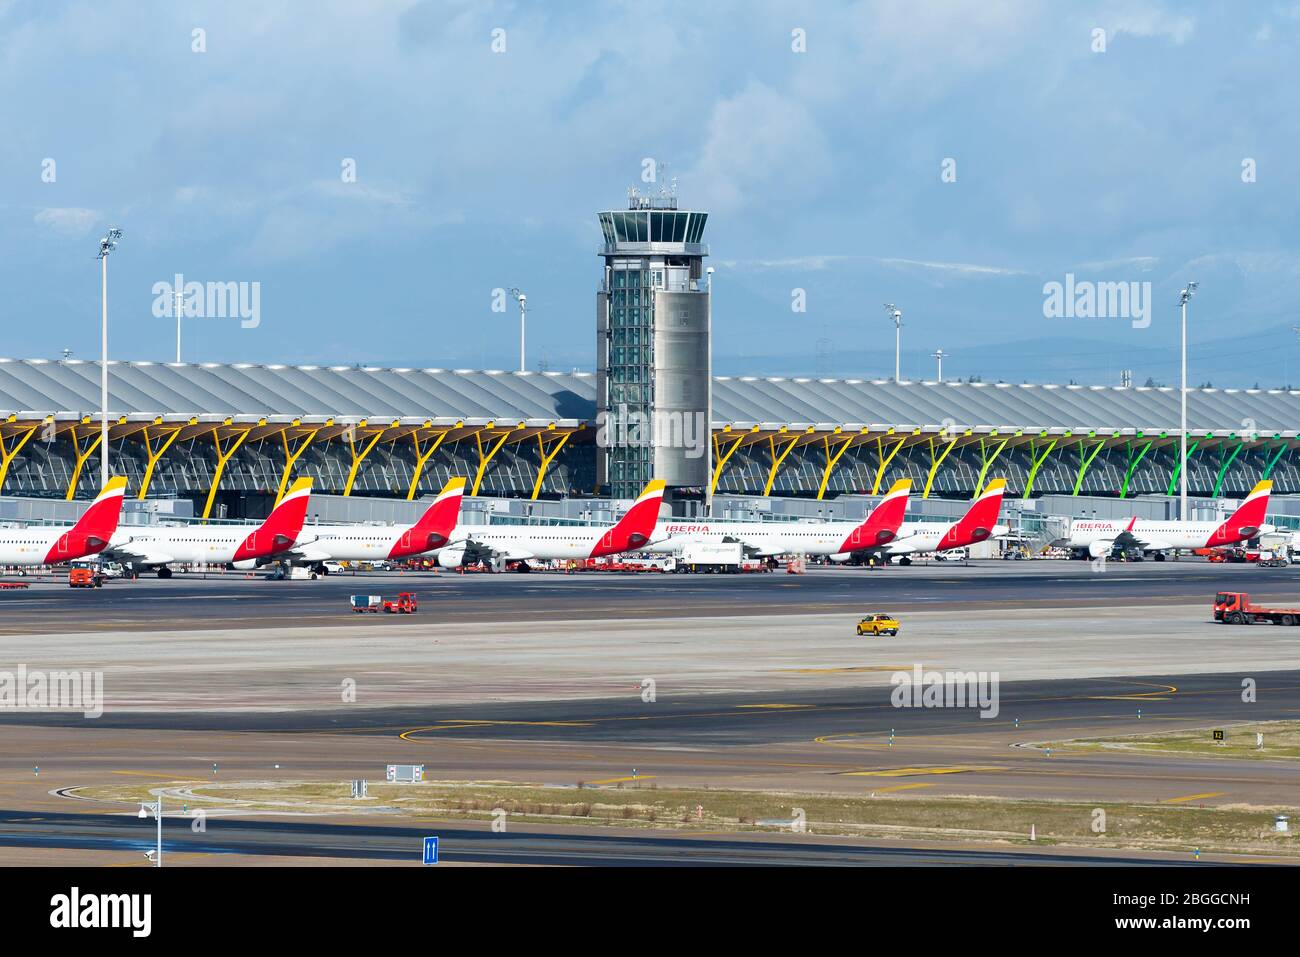 Multiple Iberia Airlines Airbus aircraft lined up Barajas Airport (LEMD) Terminal 4. Busy travel period in airline hub. Aircraft parked. Stock Photo